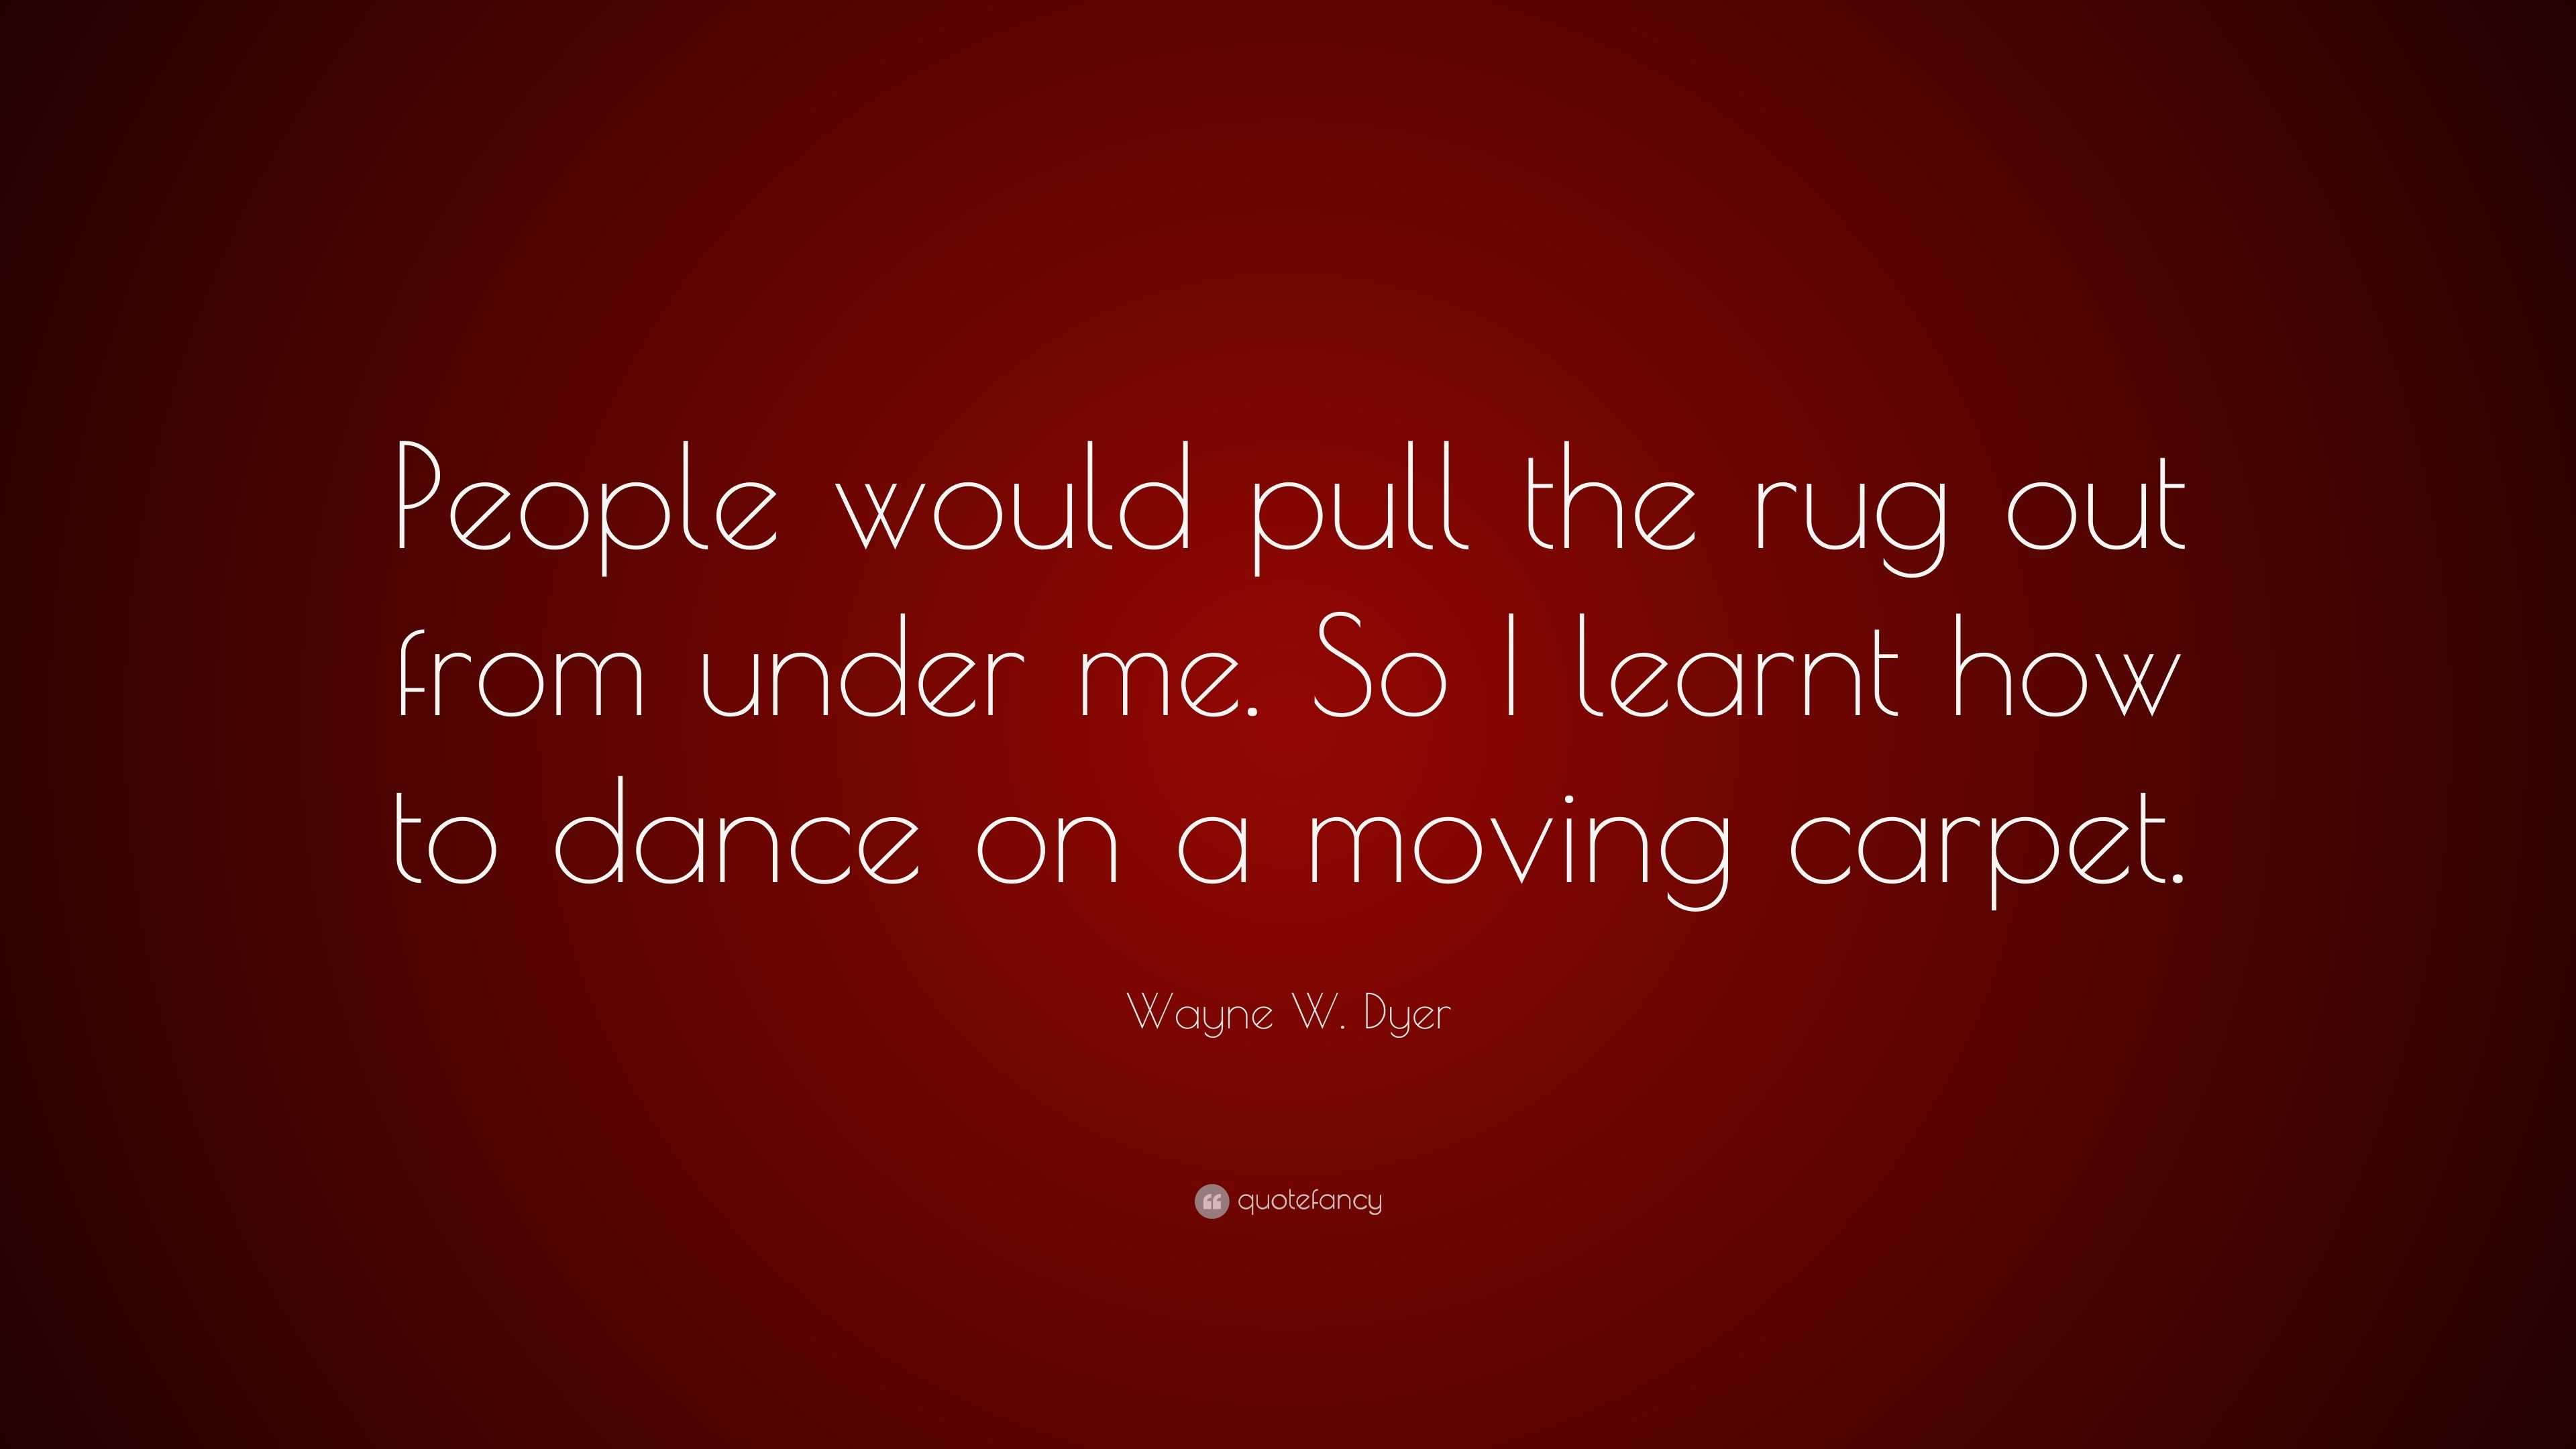 Wayne W. Dyer Quote: “People would pull the rug out from under me ...